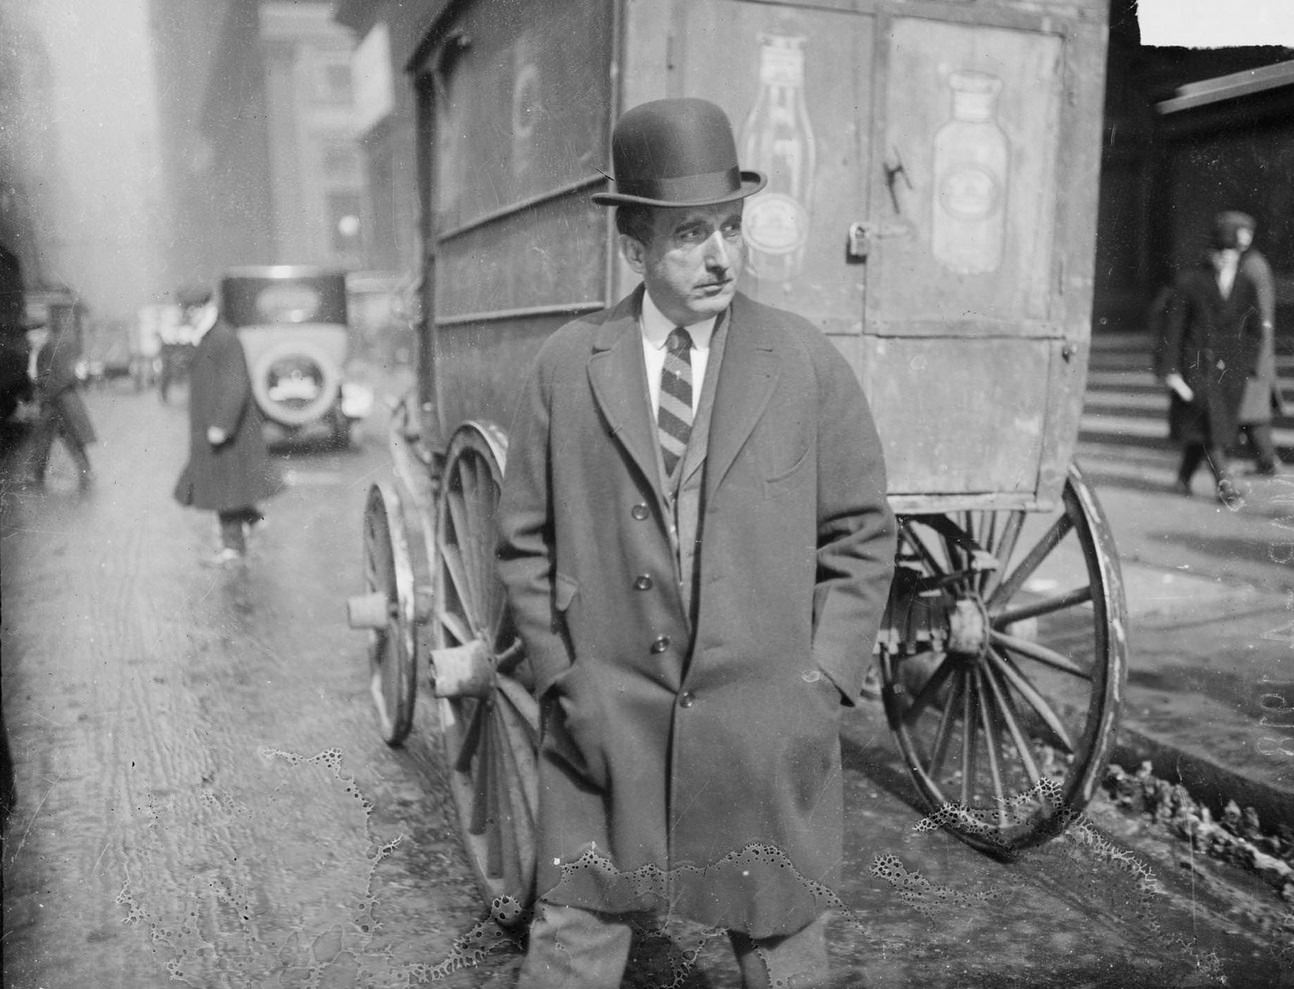 J. Ogden Armour, of the meatpacking industry and treasurer of the Illinois State Council of Defense, walking across a street, Chicago, Illinois, 1918.